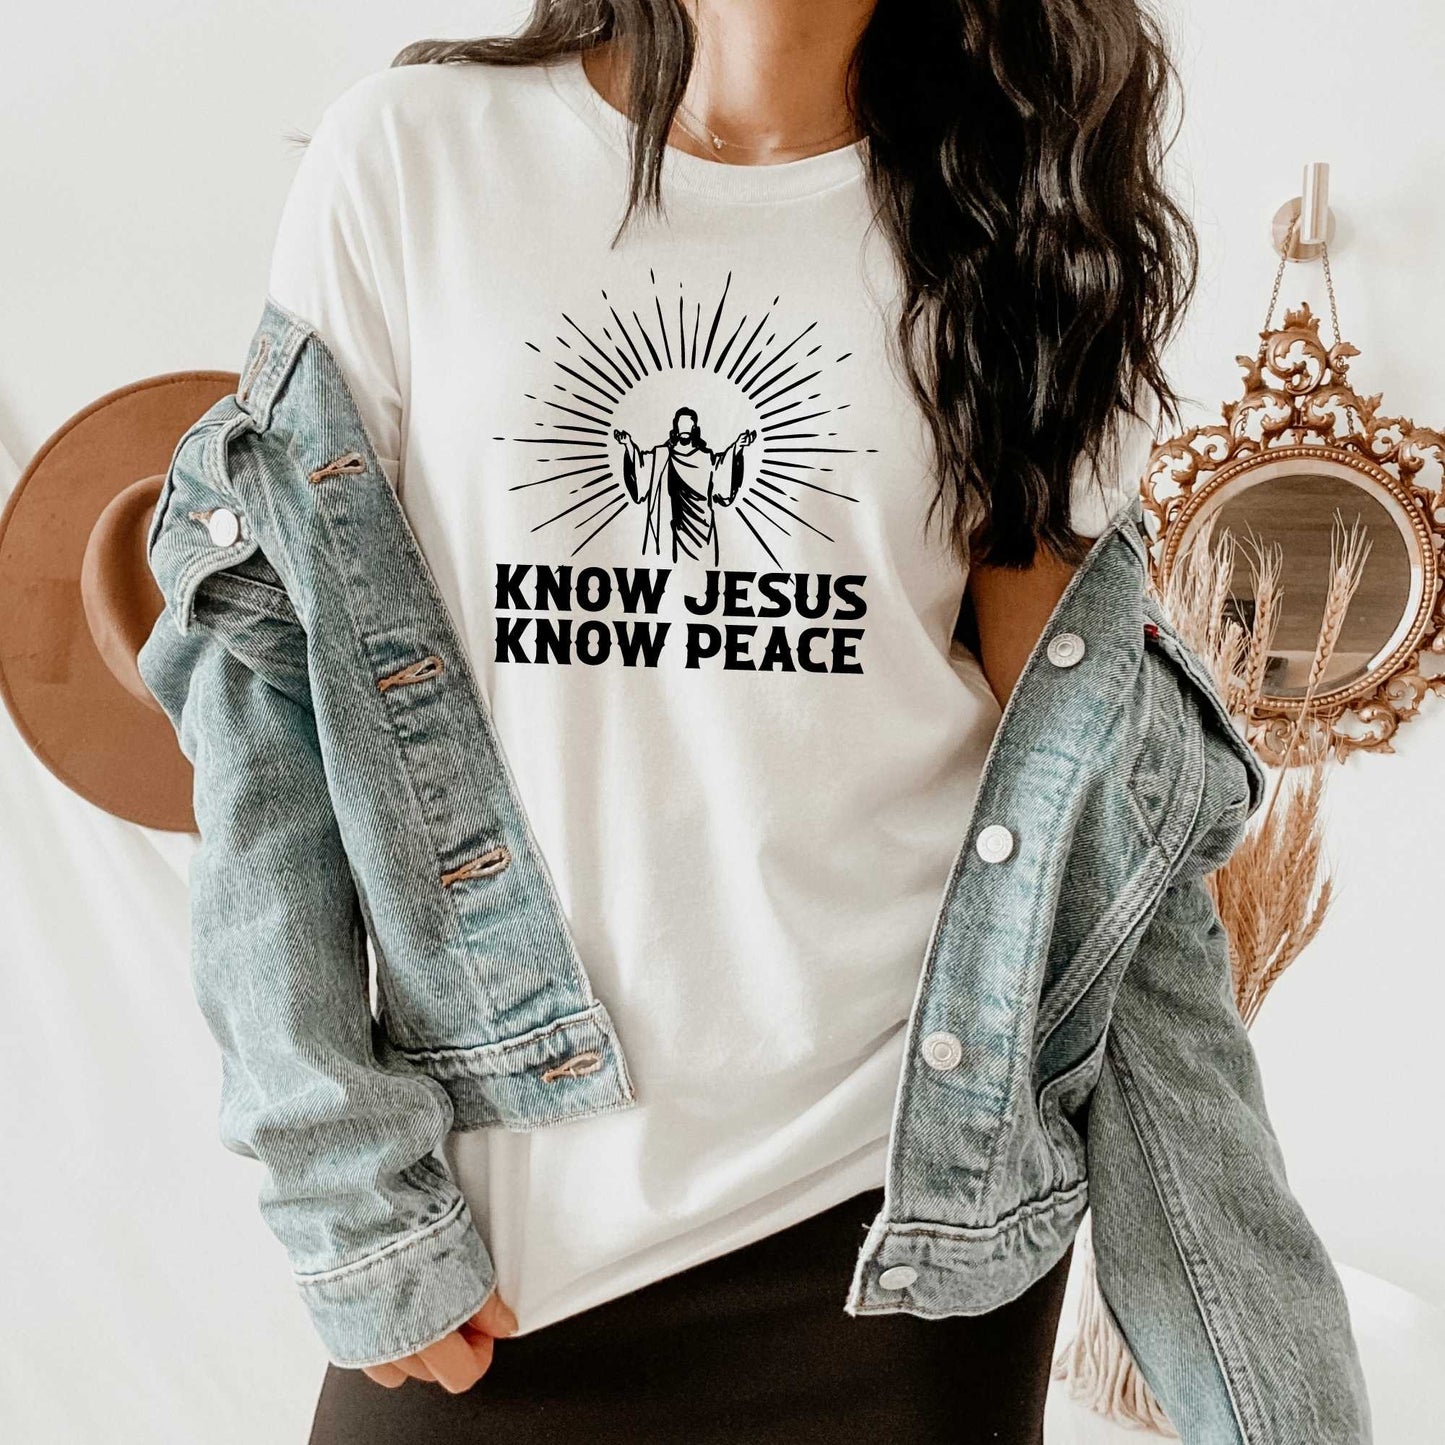 Know Jesus Know Peace Shirt about God for Women or Men